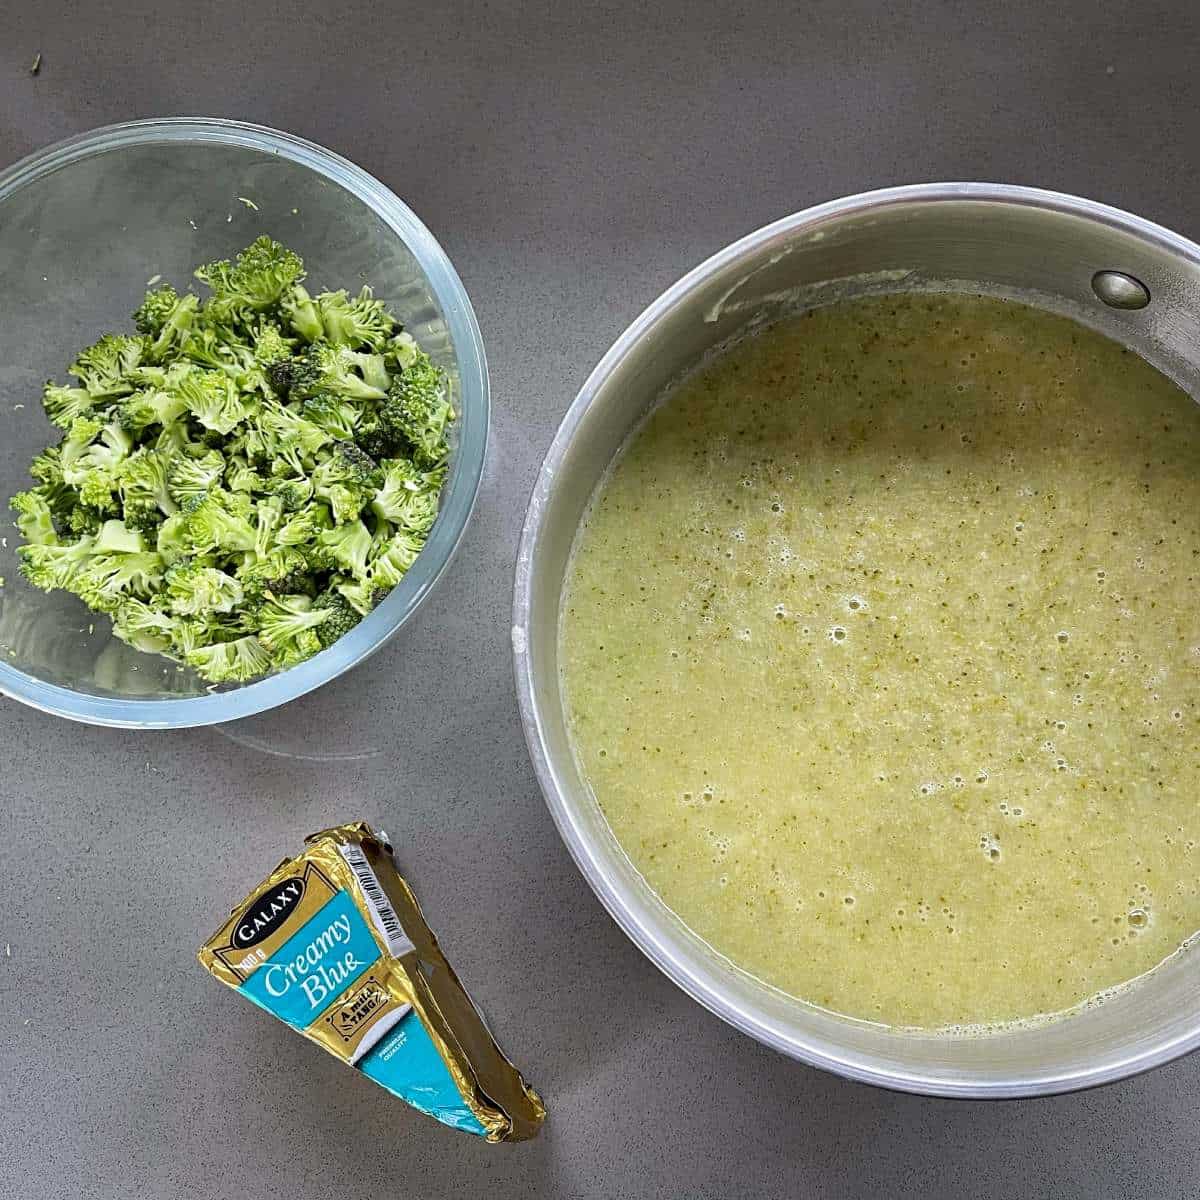 Cooked blue cheese and broccoli soup in a saucepan with a small glass bowl of broccoli pieces and a packet of blue cheese sitting on a grey bench top